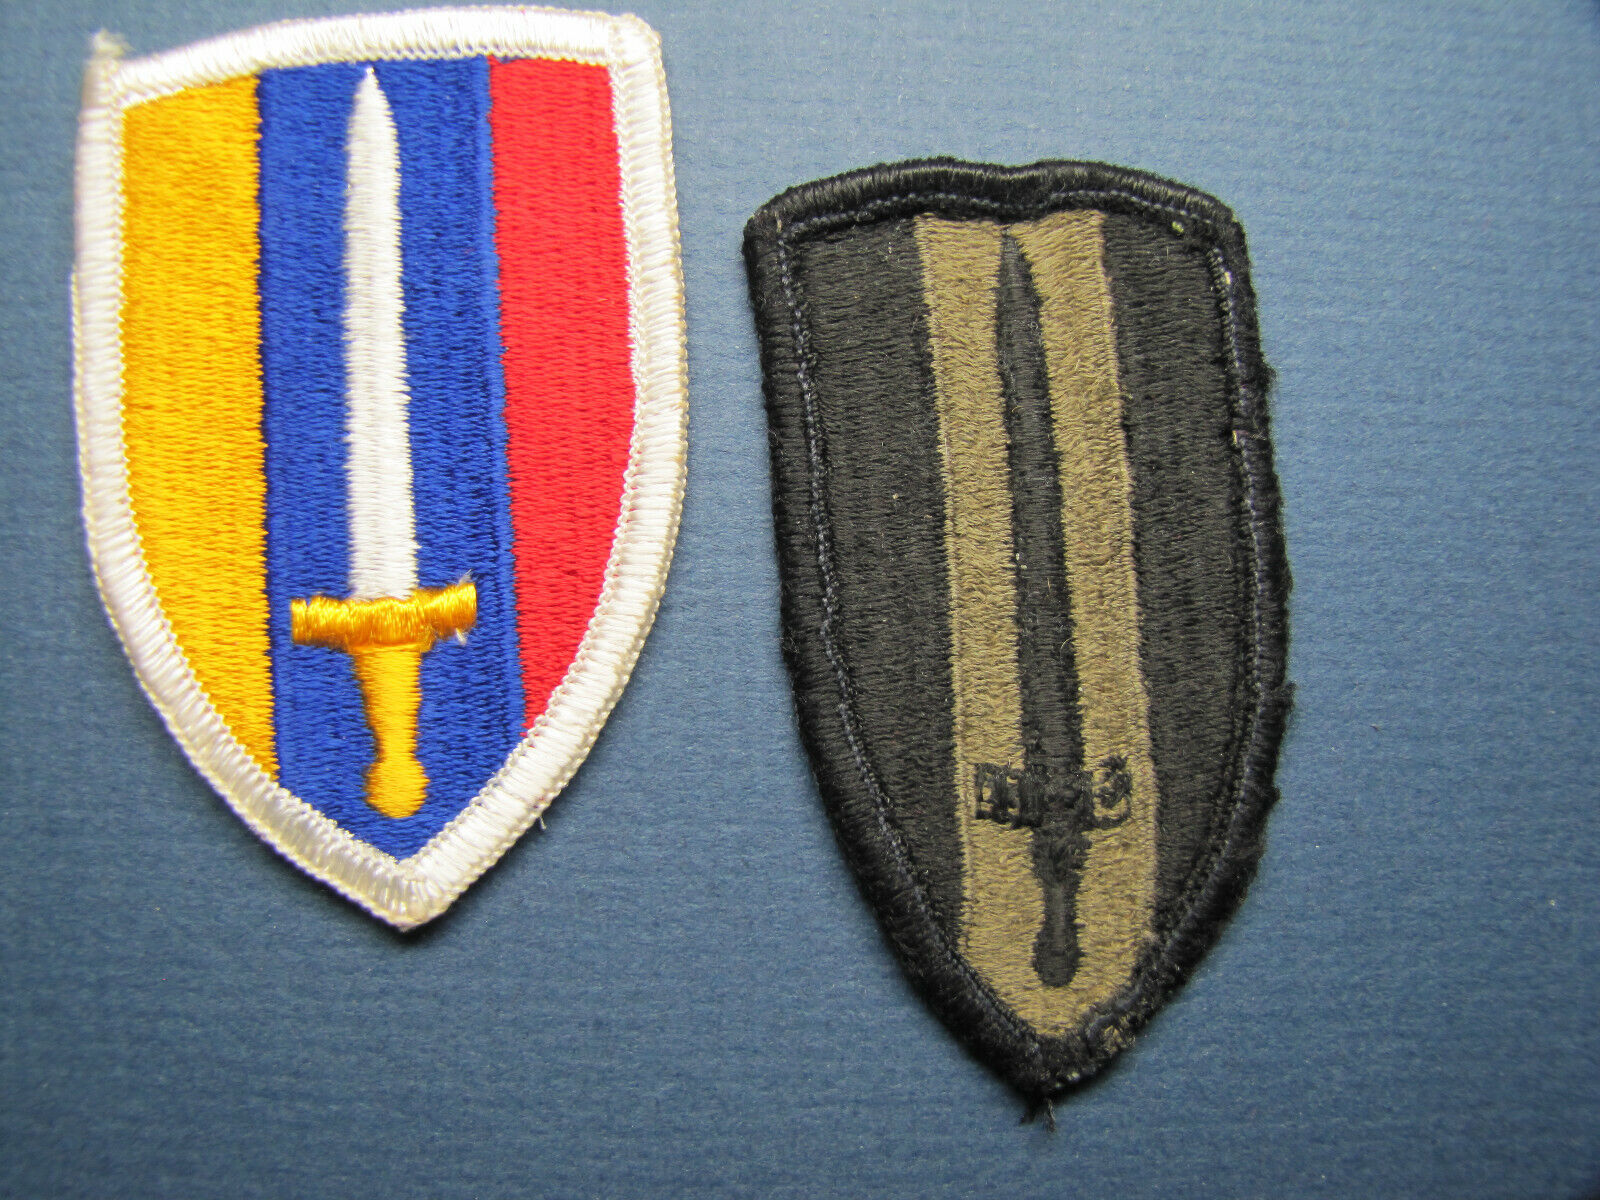 2 REAL US ARMY VIET NAM MILITARY AID PATCHES 